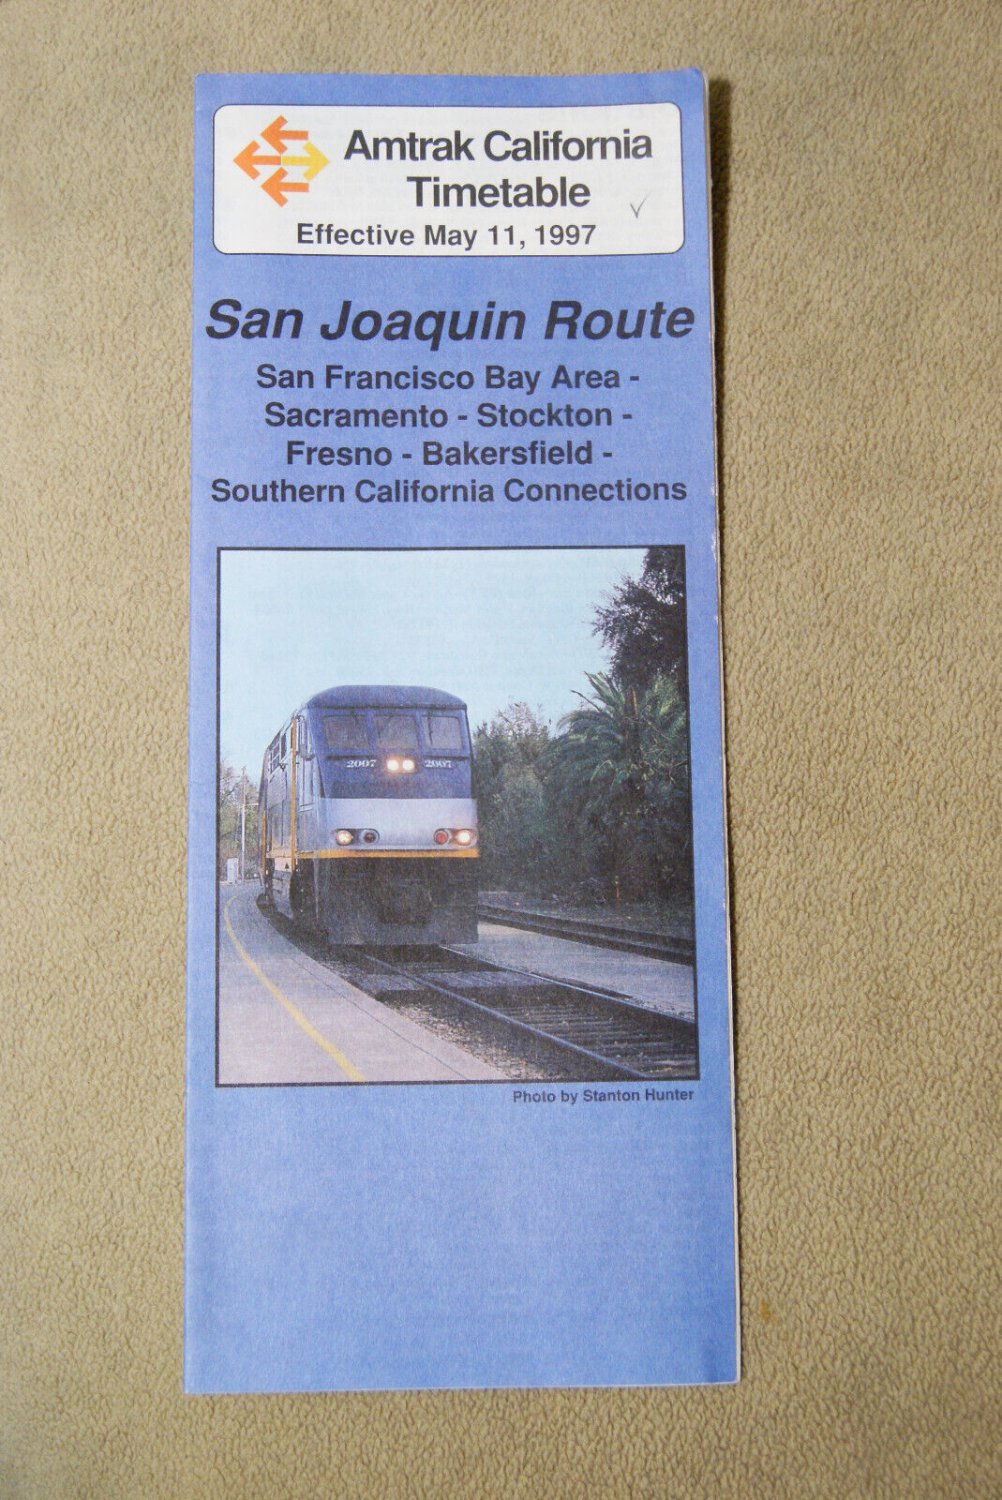 San Joaquin Route - Amtrak Timetable - May 11, 1997